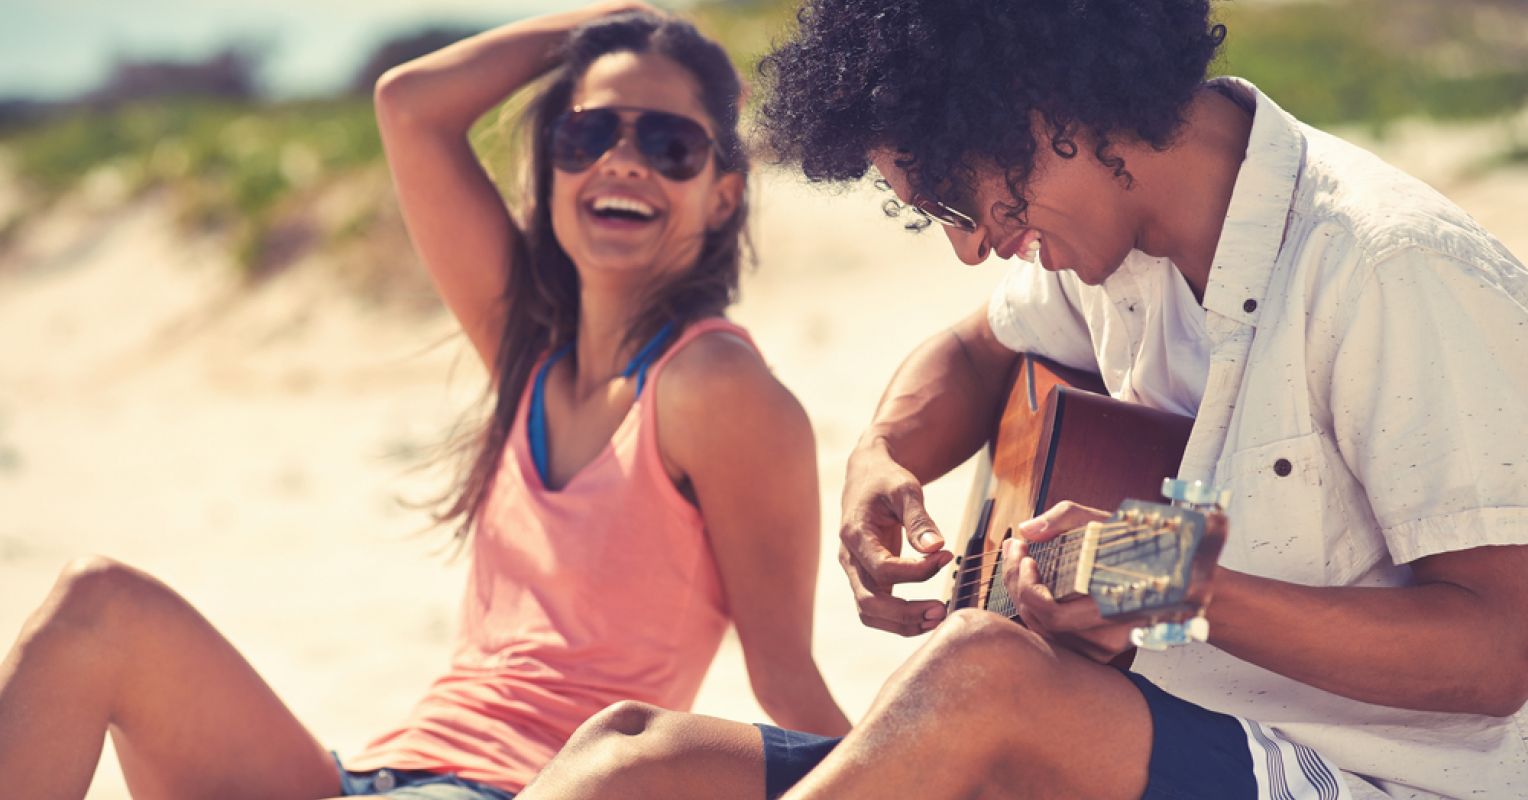 10 Things Happy Couples Regularly Do Together